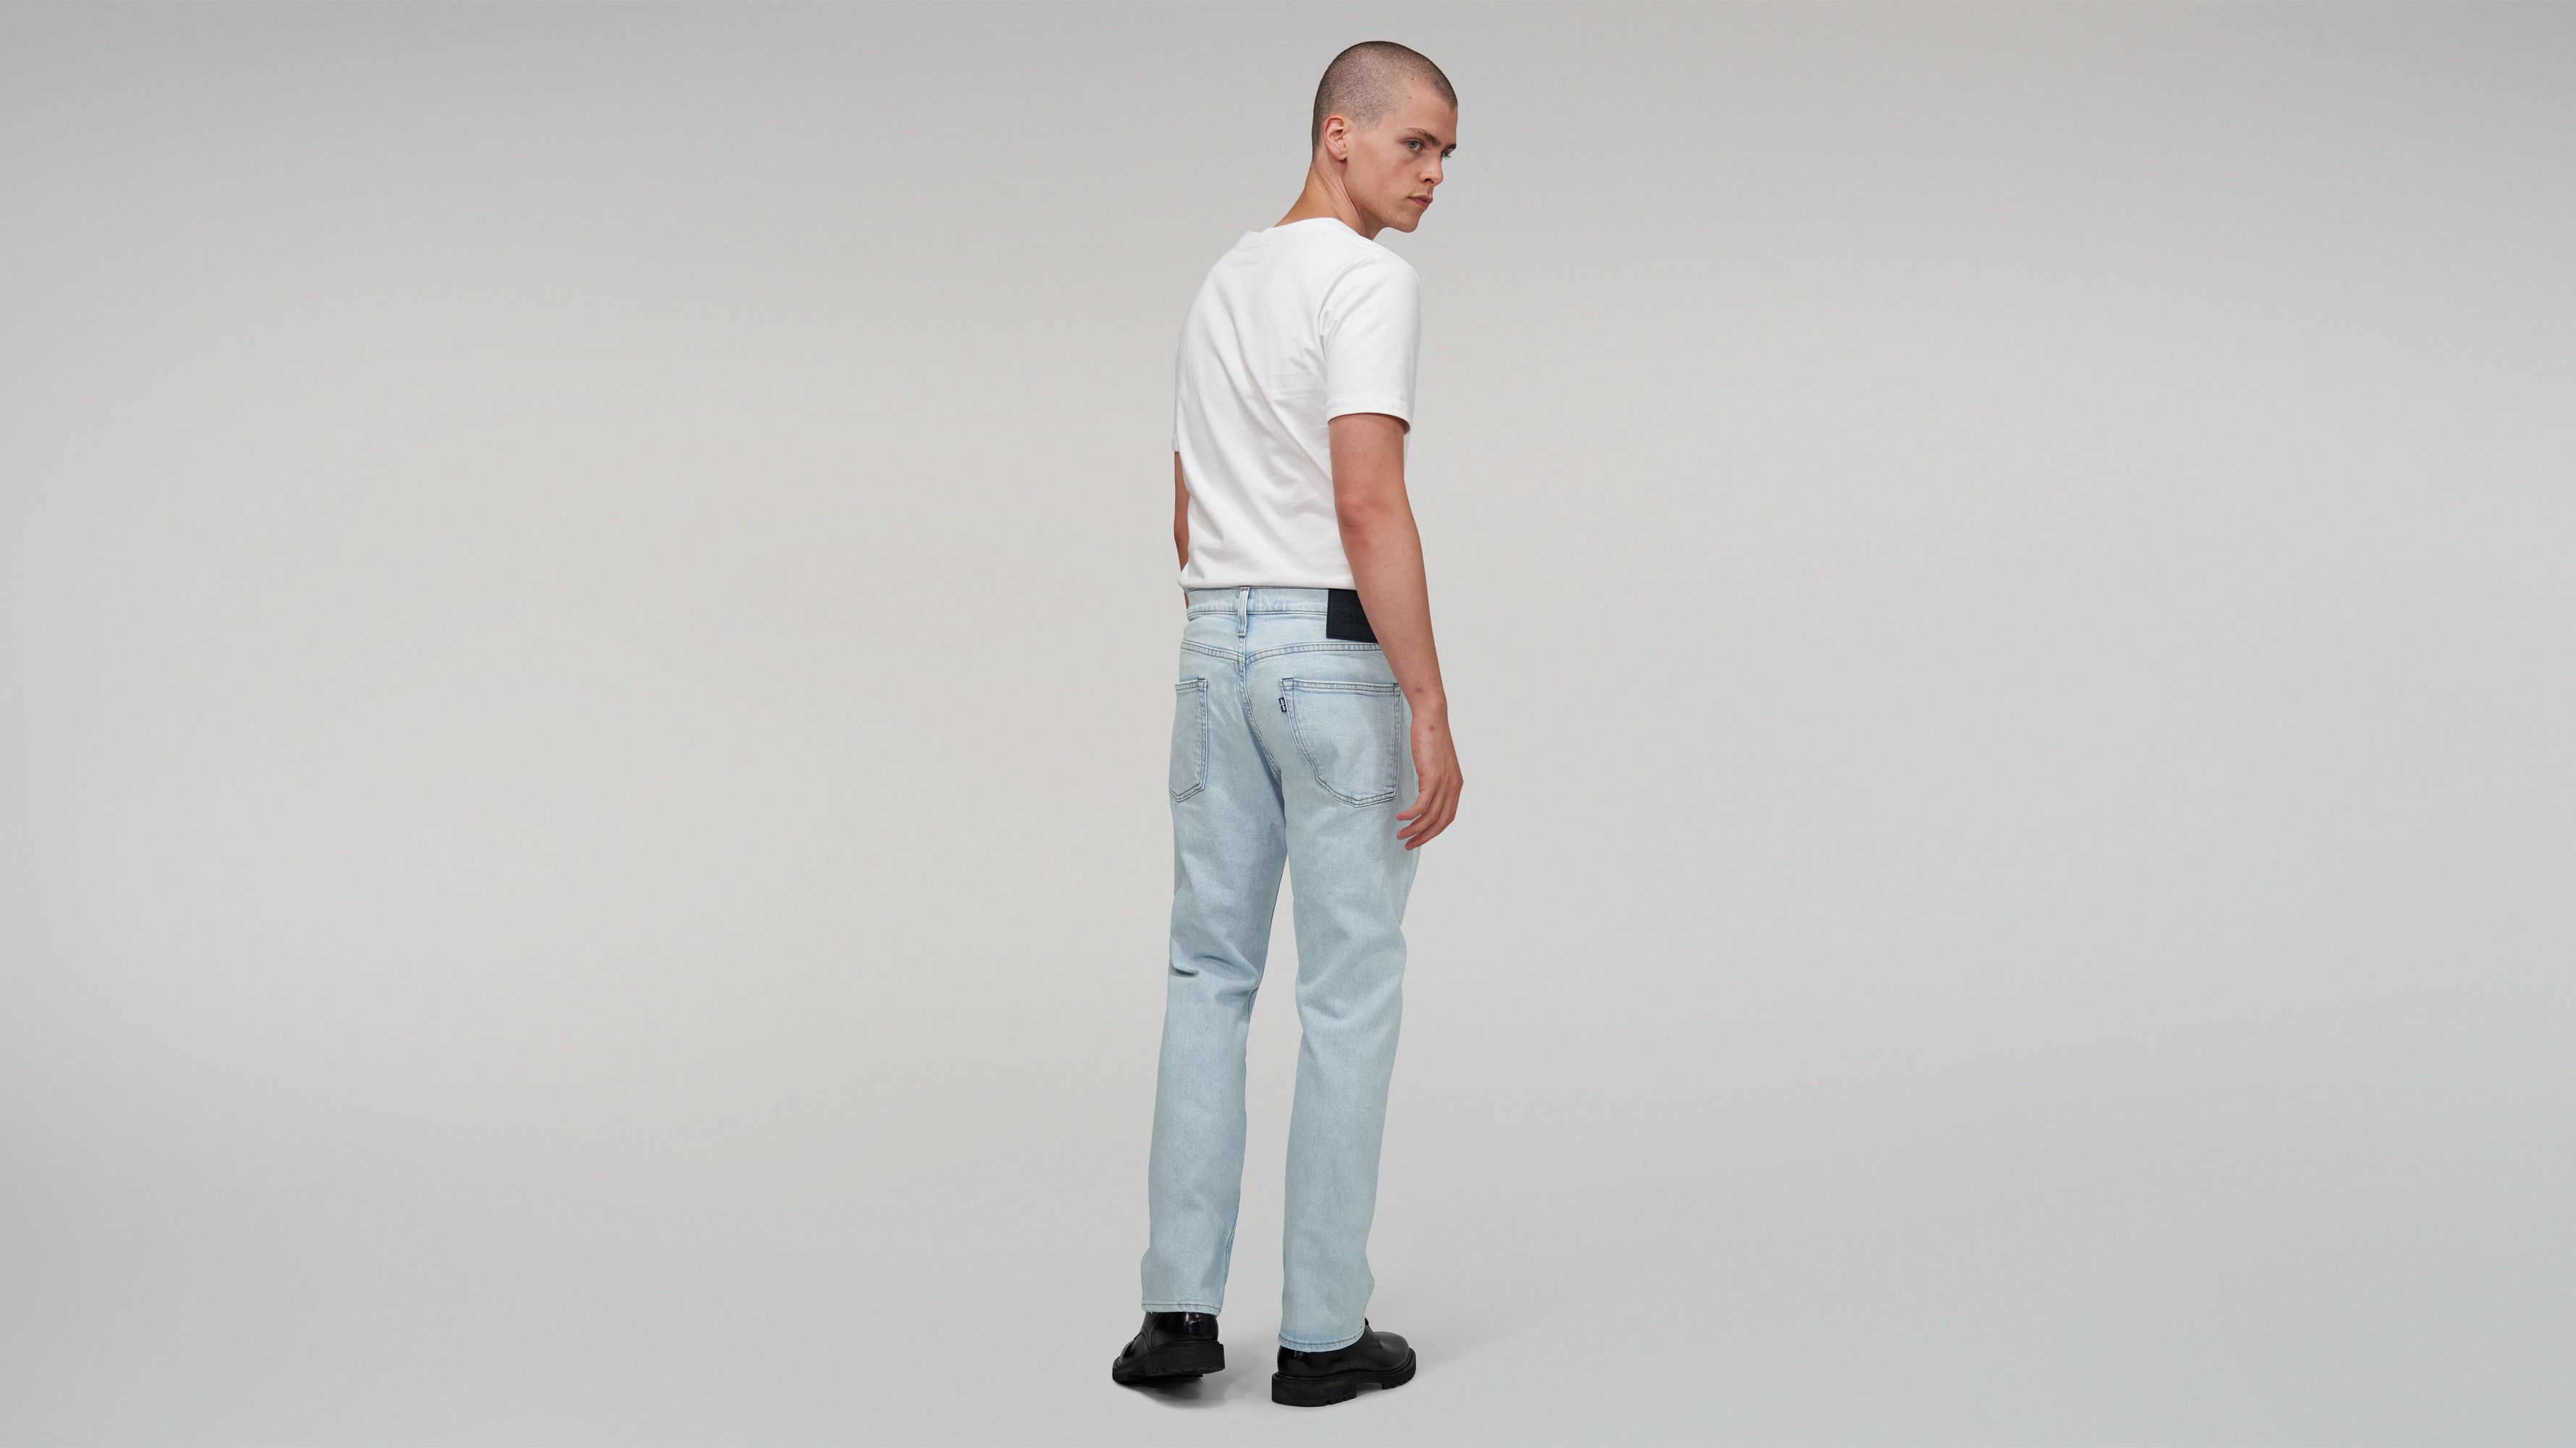 levis made and crafted jeans